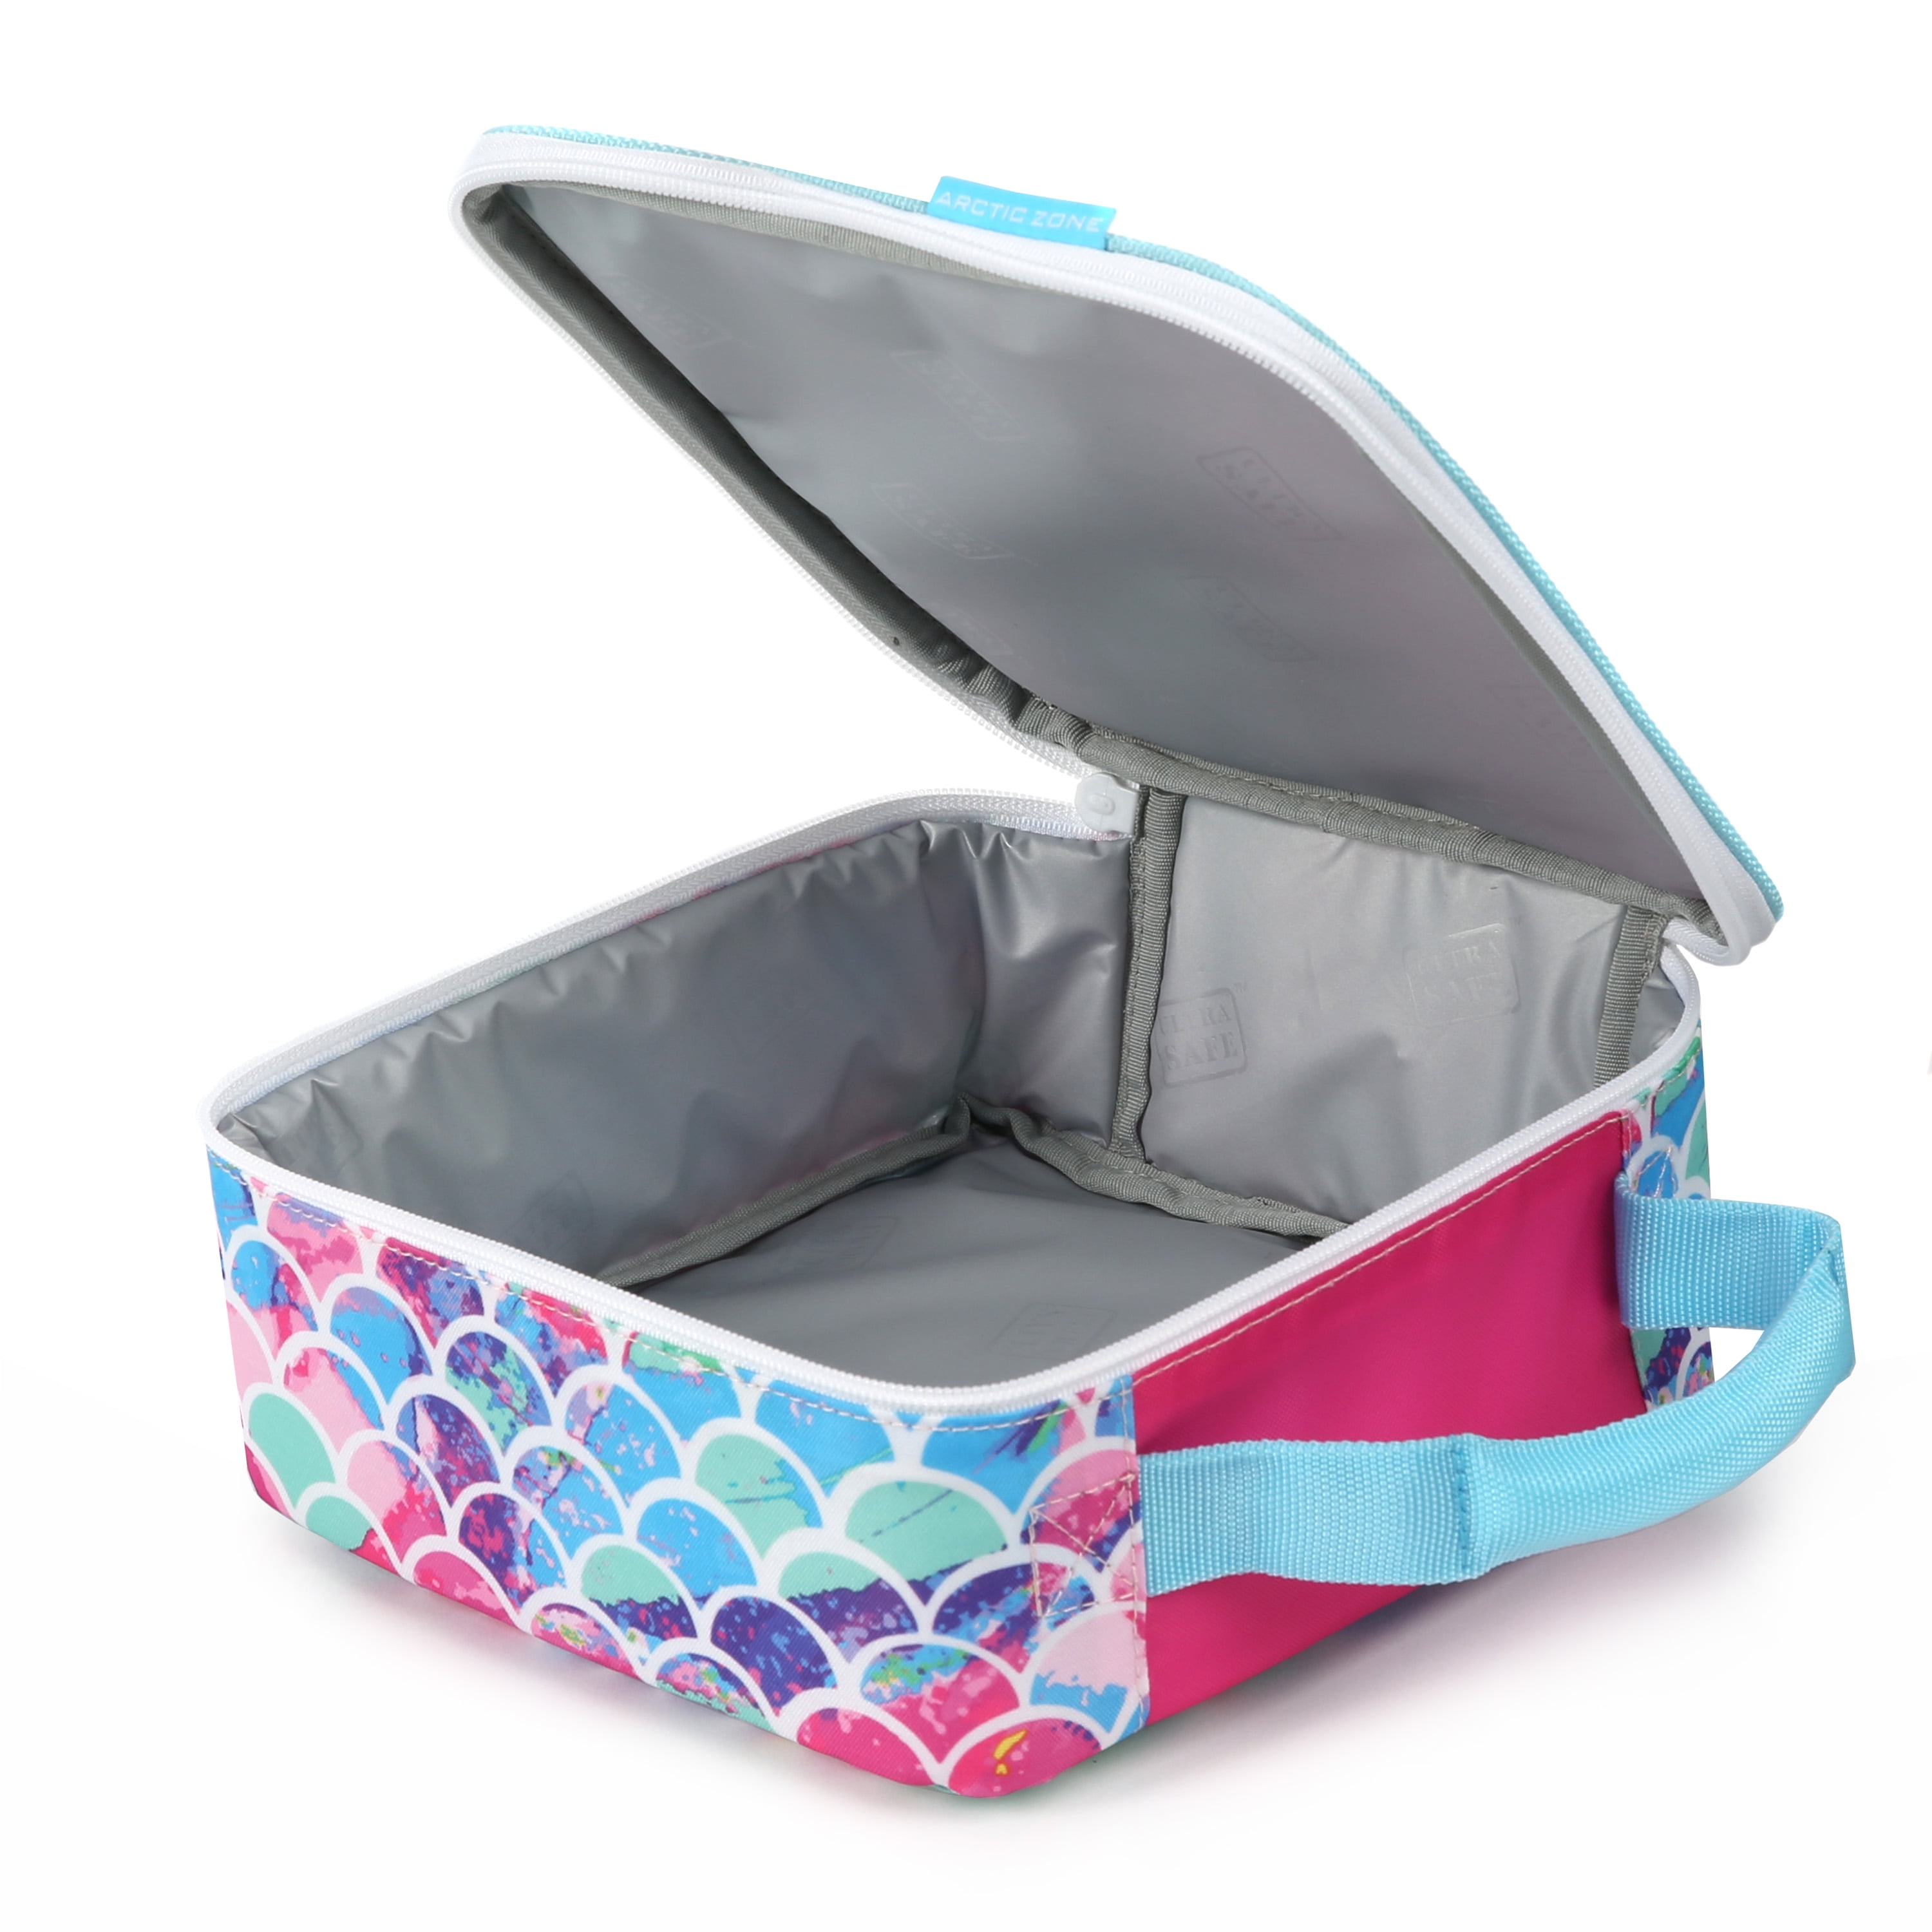 Arctic Zone Reusable Lunch Box Combo Kit with Accessories, Mermaid 